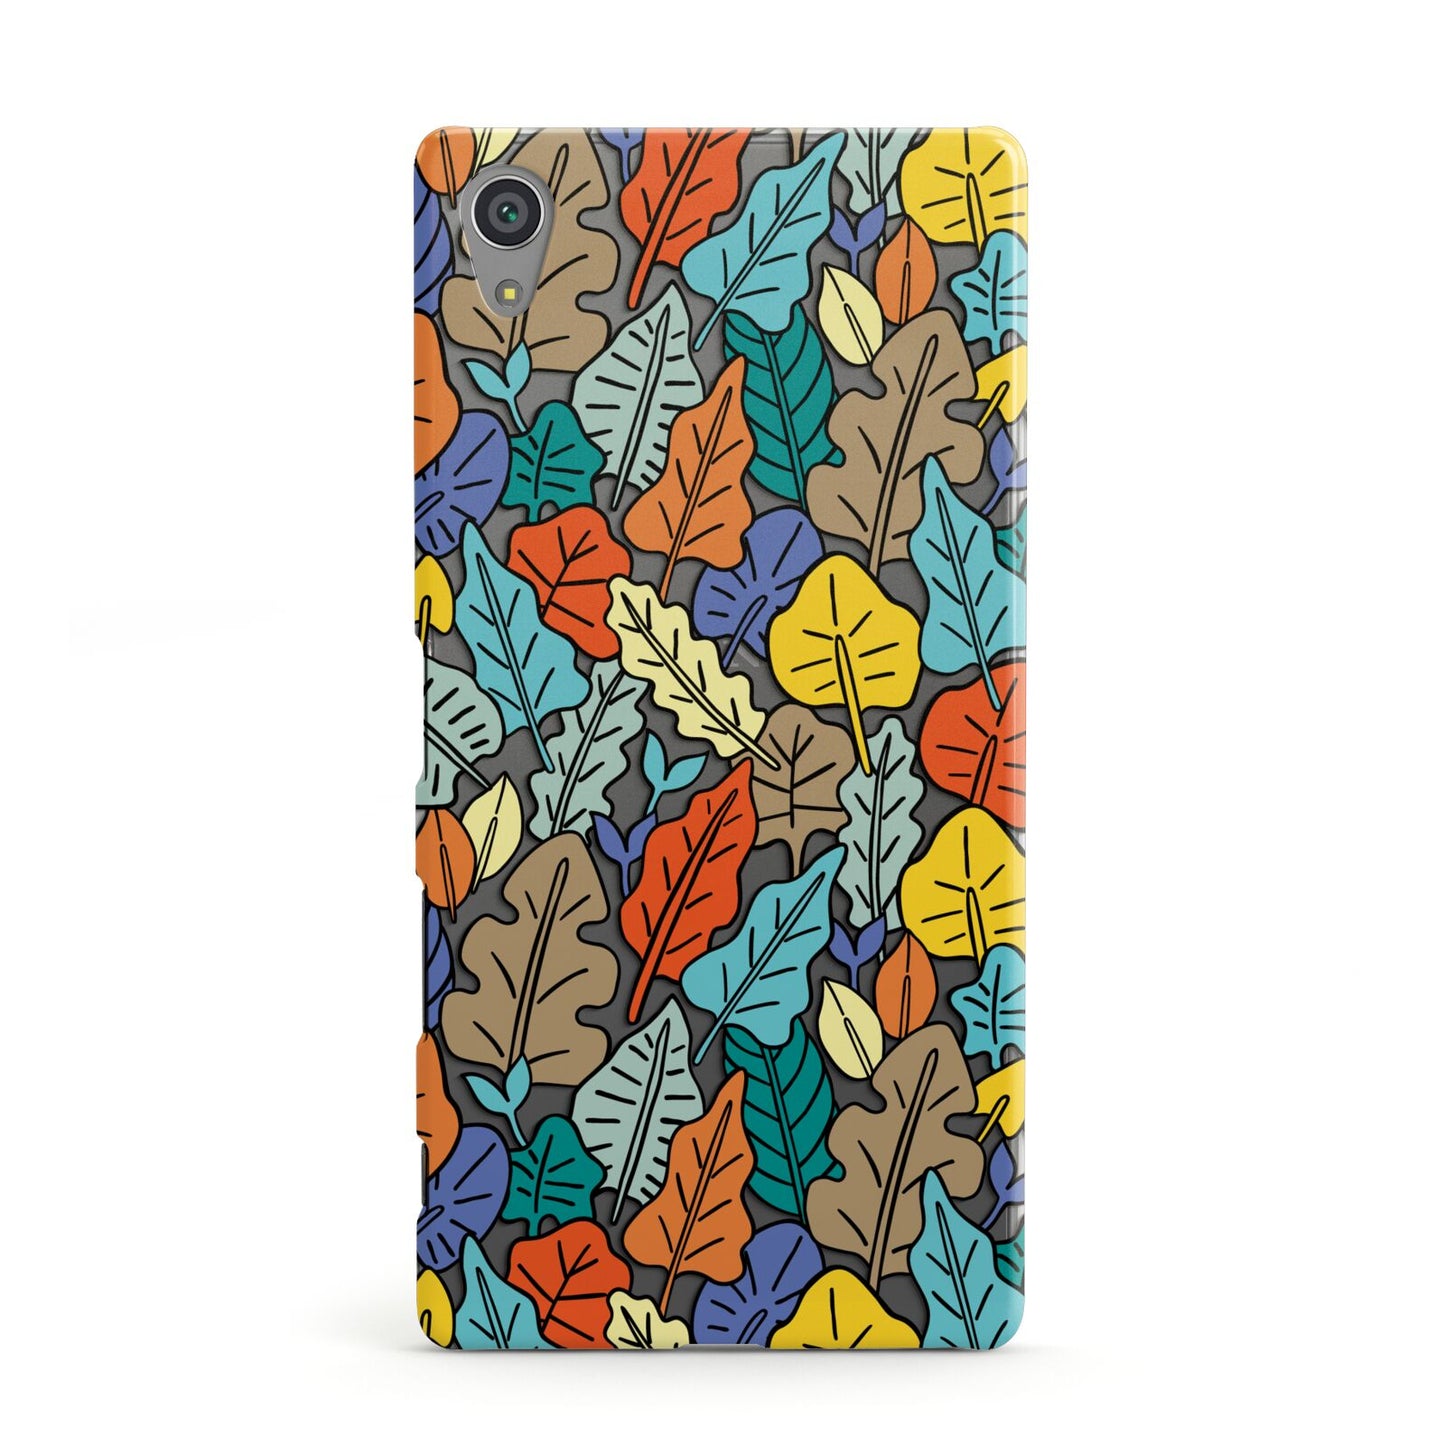 Autumn Leaves Sony Xperia Case